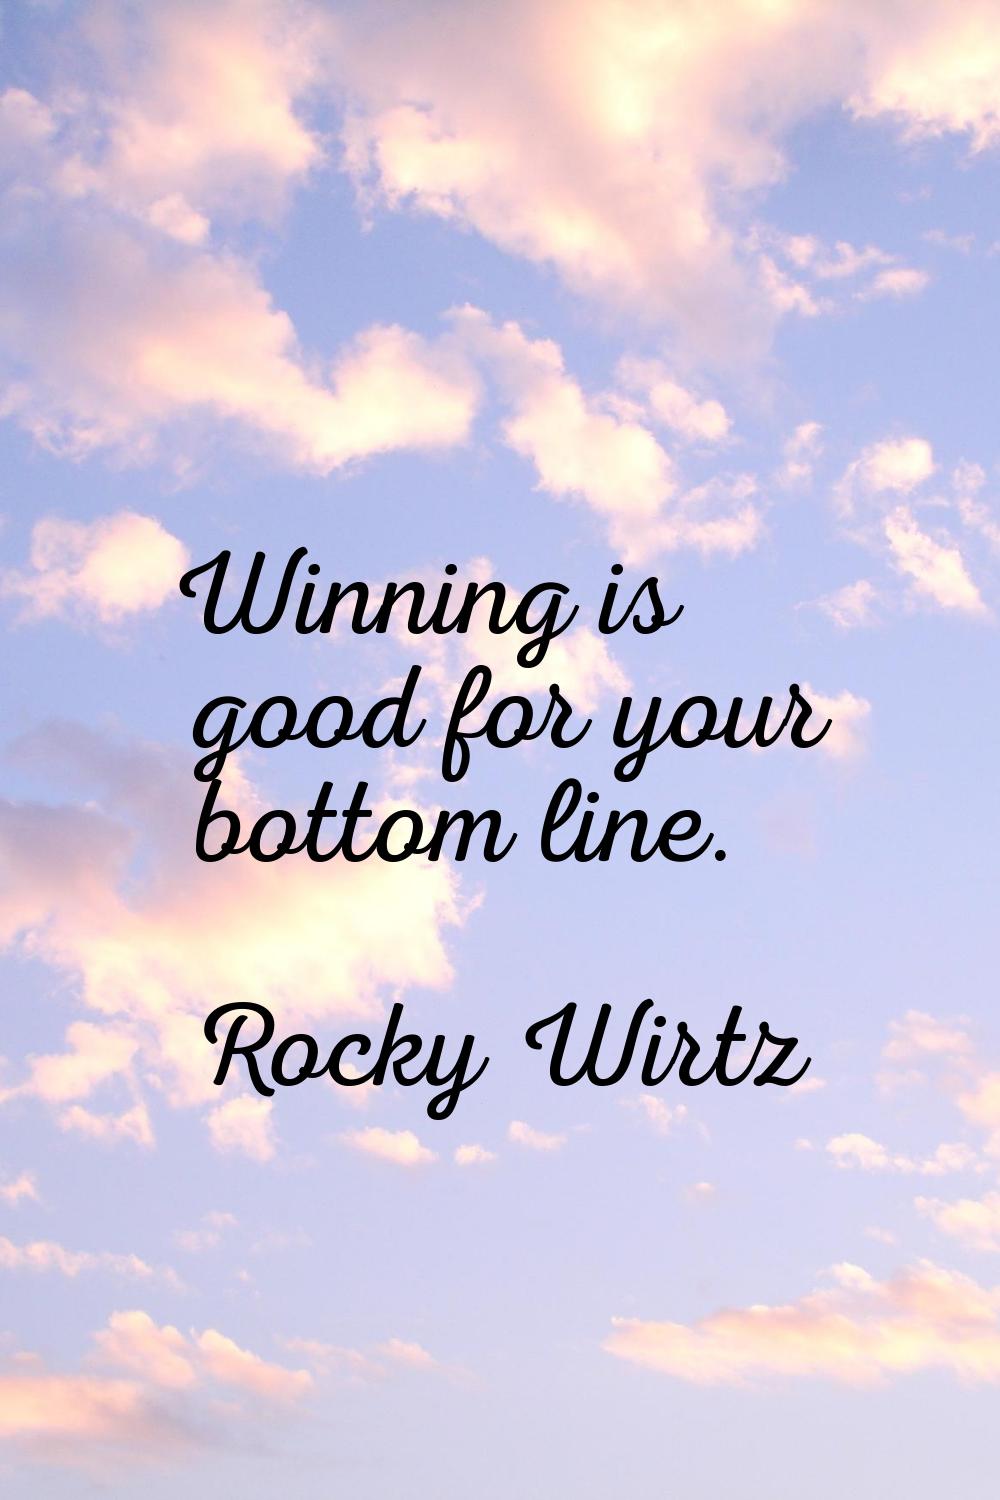 Winning is good for your bottom line.